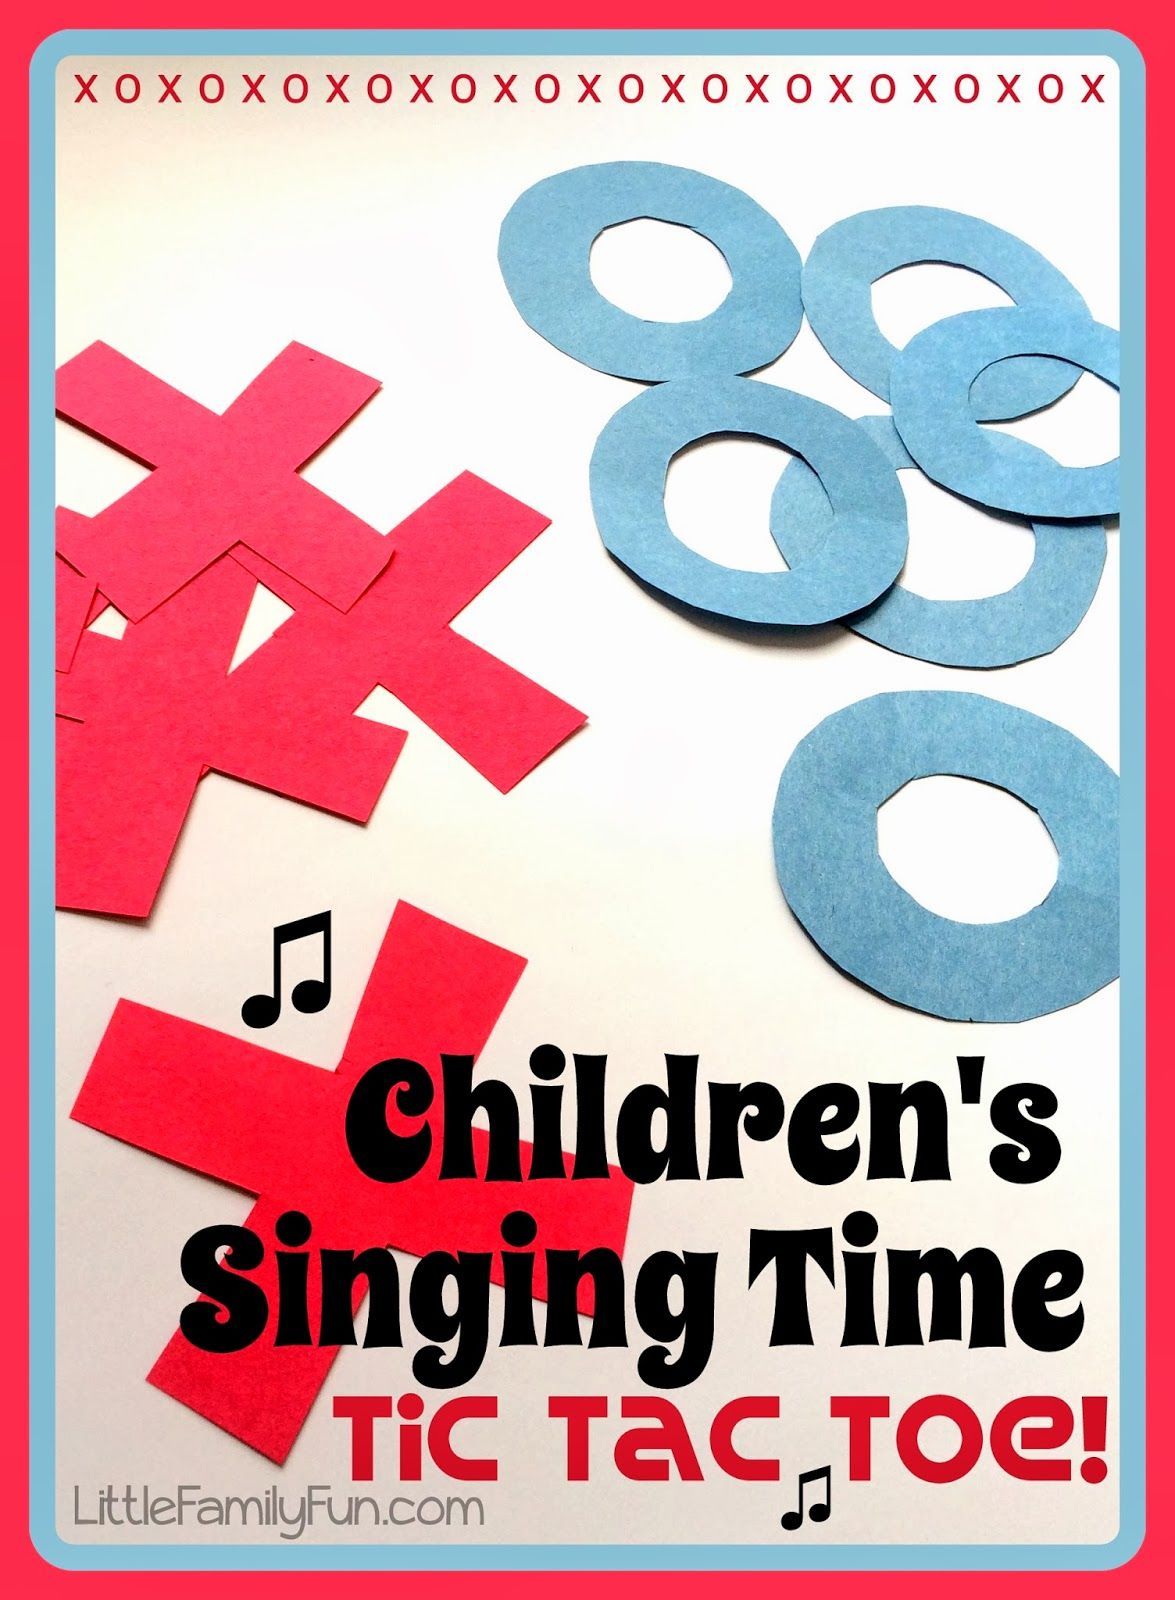 Fun game for singing time with kids! Great Primary singing time idea! Music with kids.